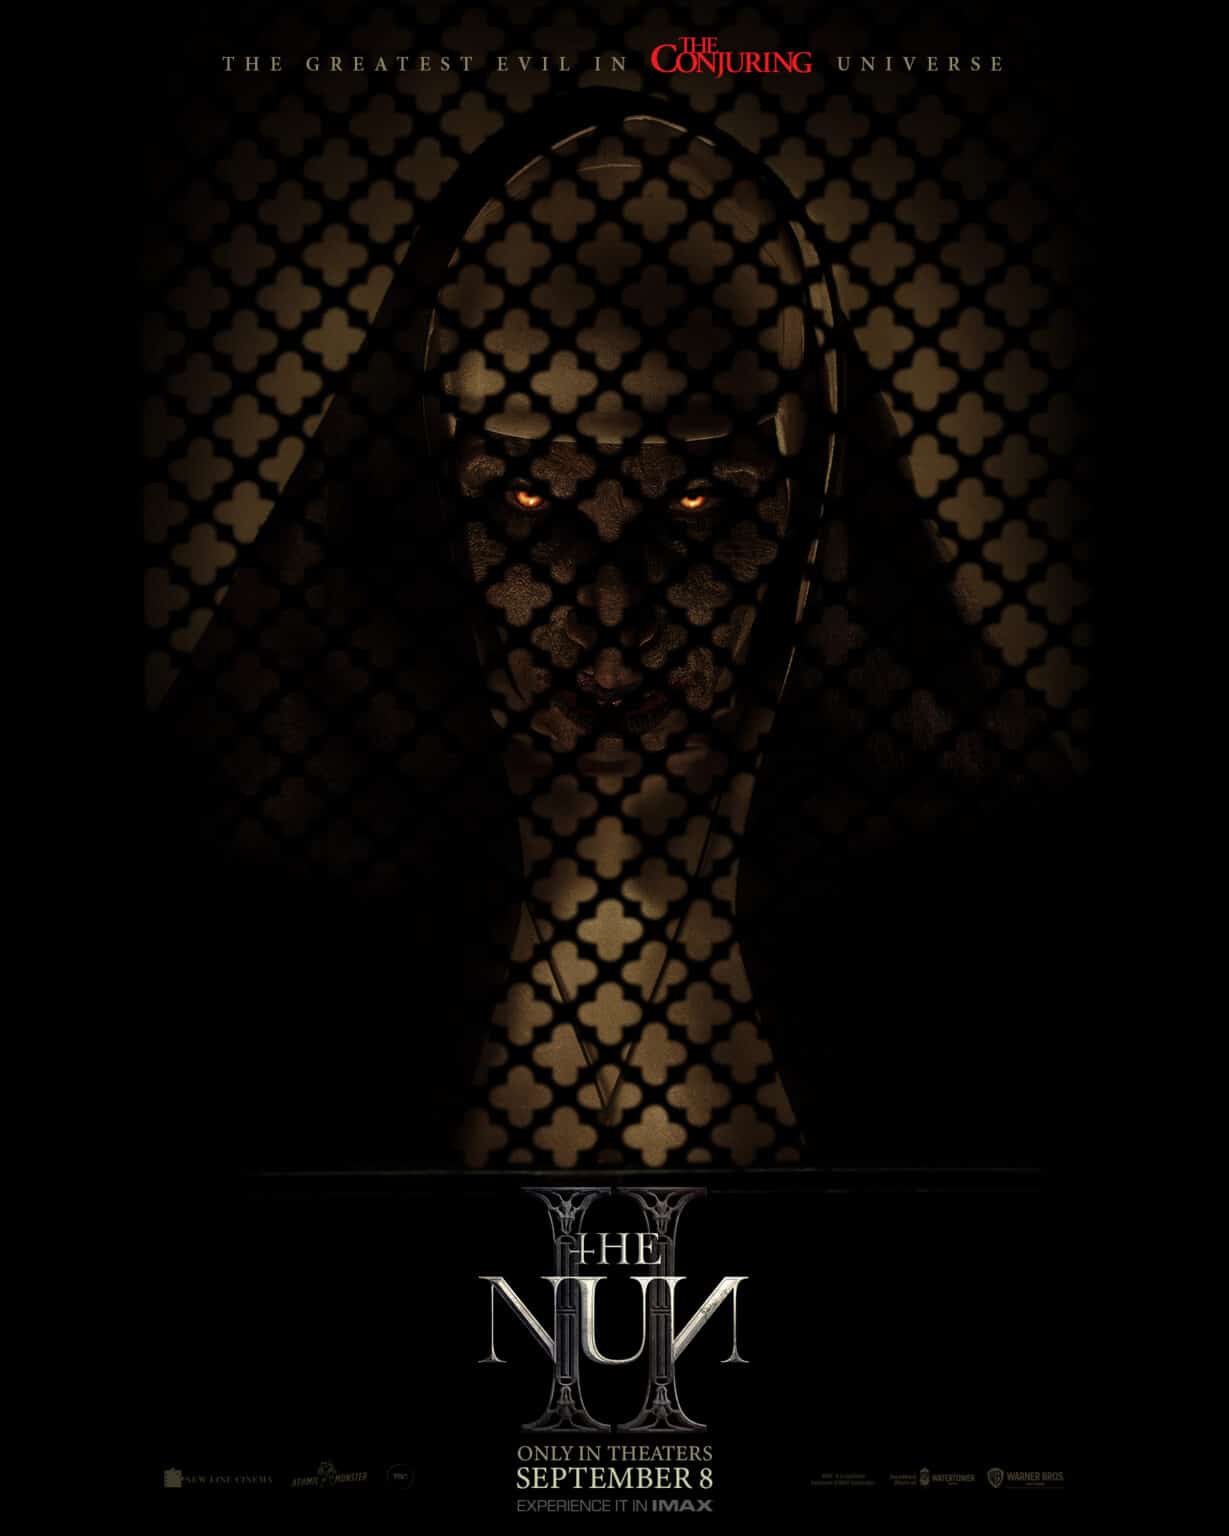 The Nun II: latest Conjuring Universe film gets a new trailer ahead of September release